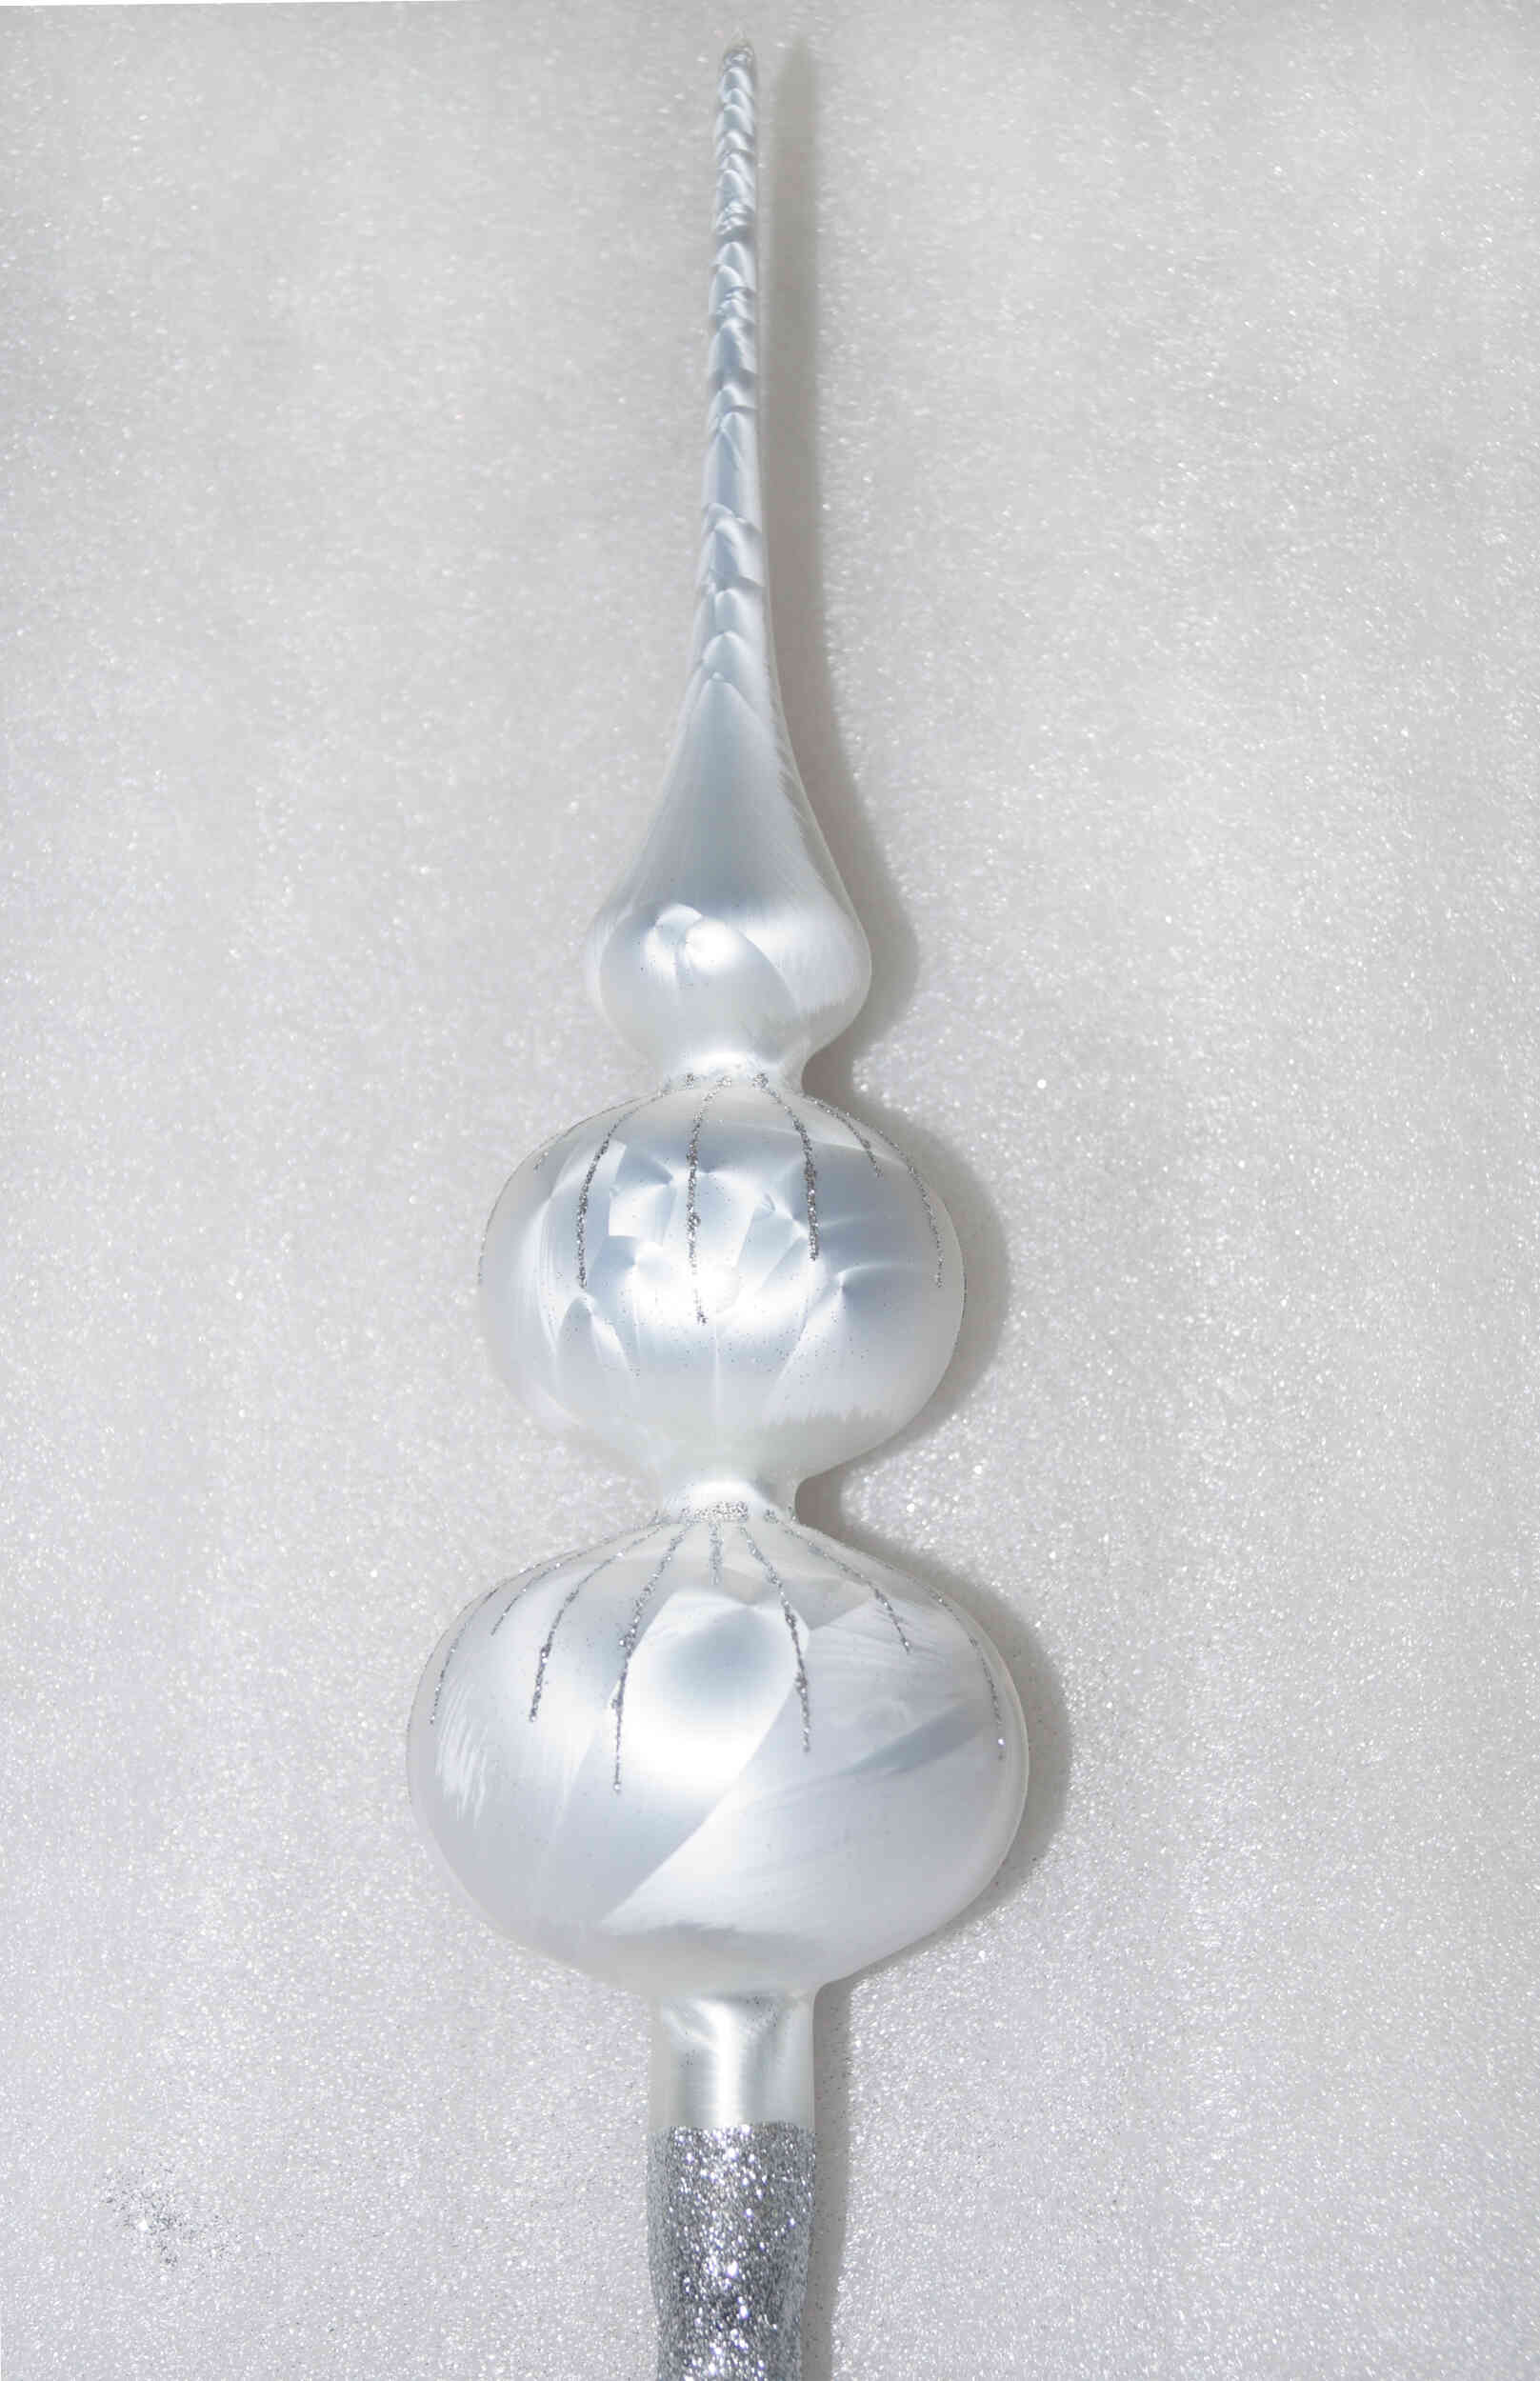 One handmade christmas tree topper in "white with silver drops".